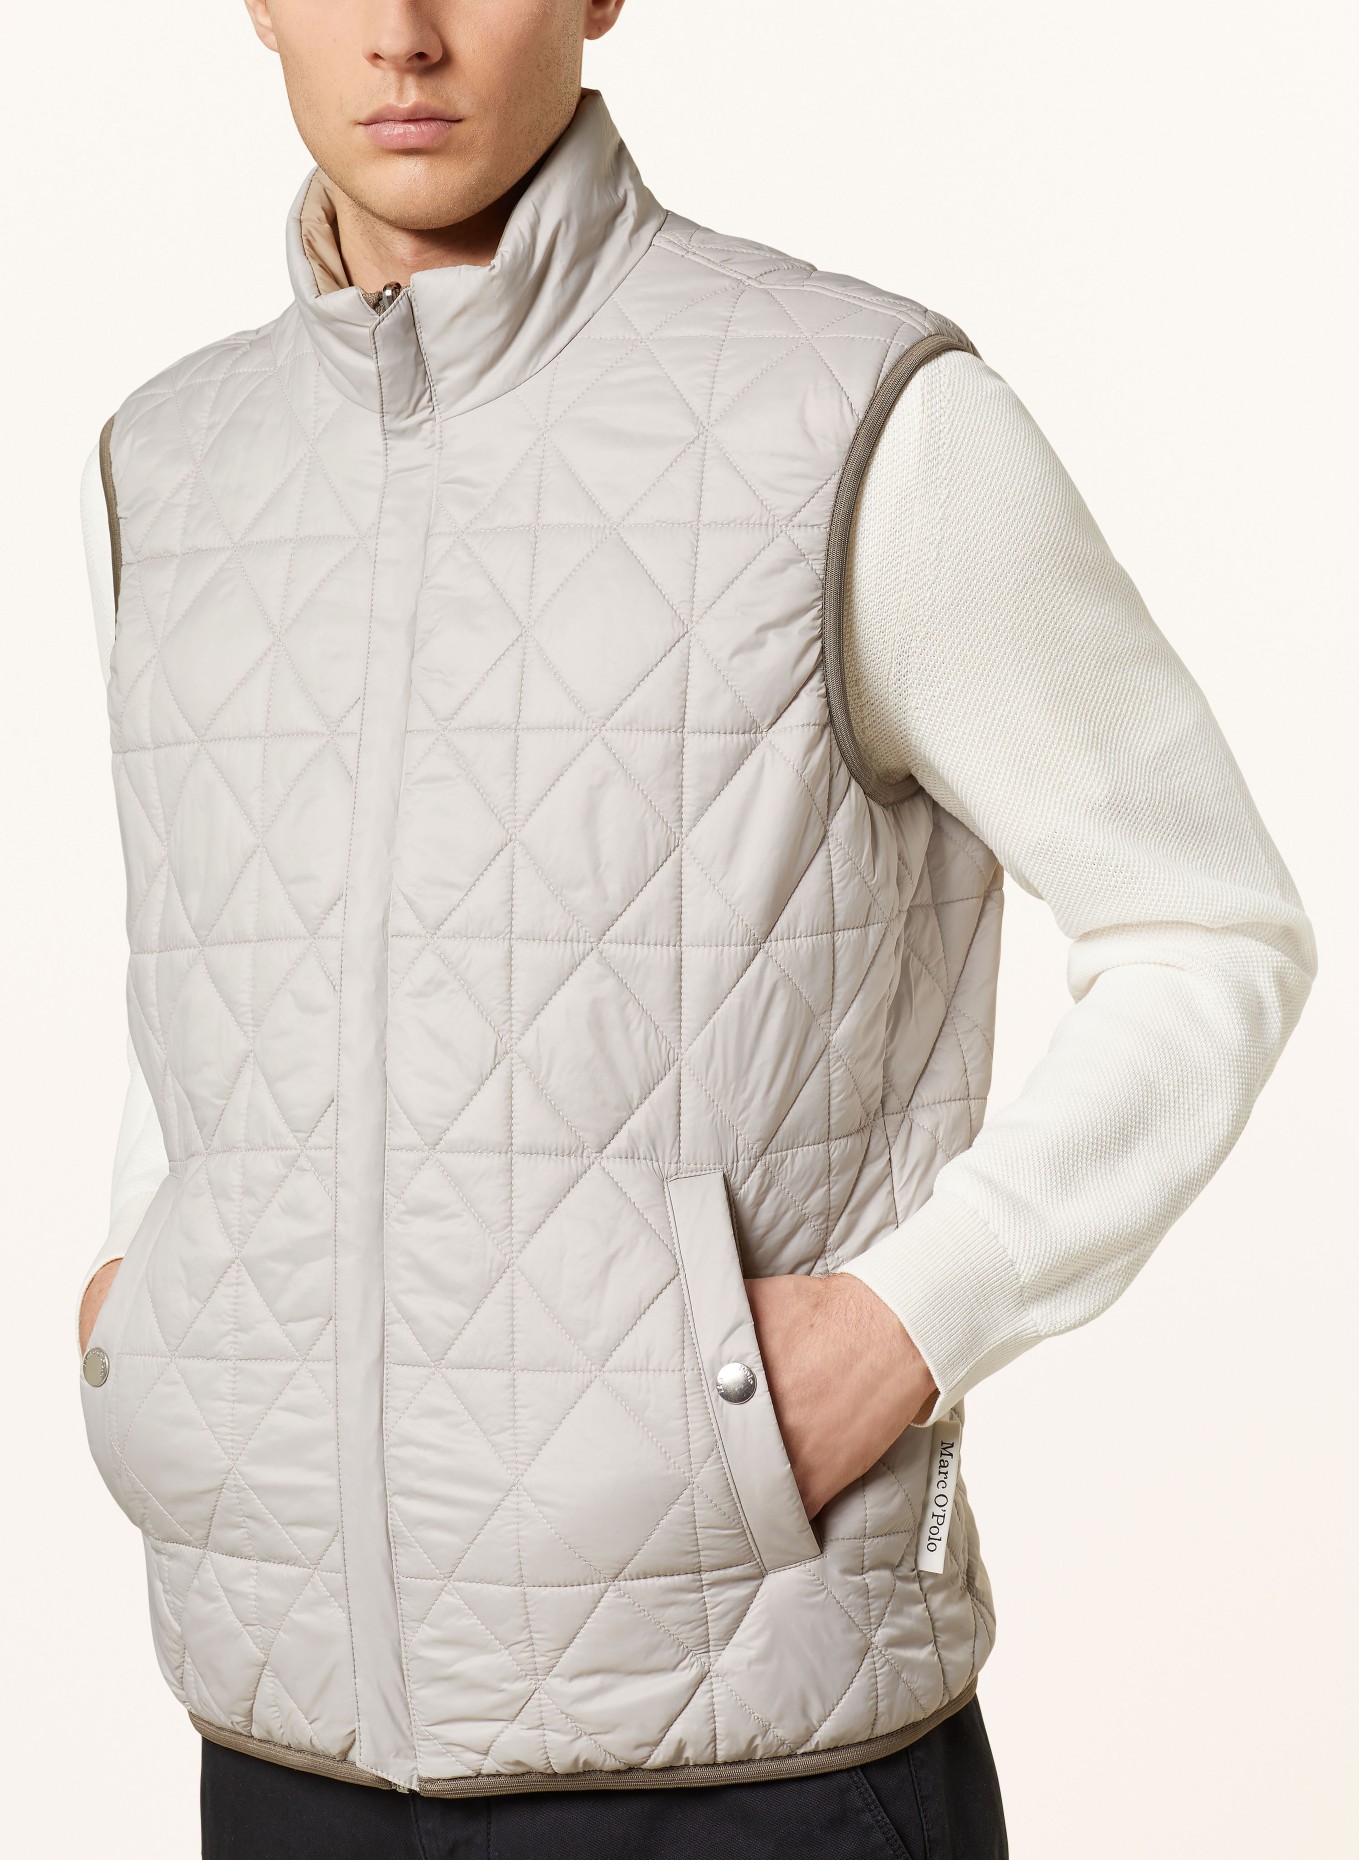 Marc O'Polo Quilted vest reversible, Color: BEIGE/ LIGHT GRAY (Image 6)